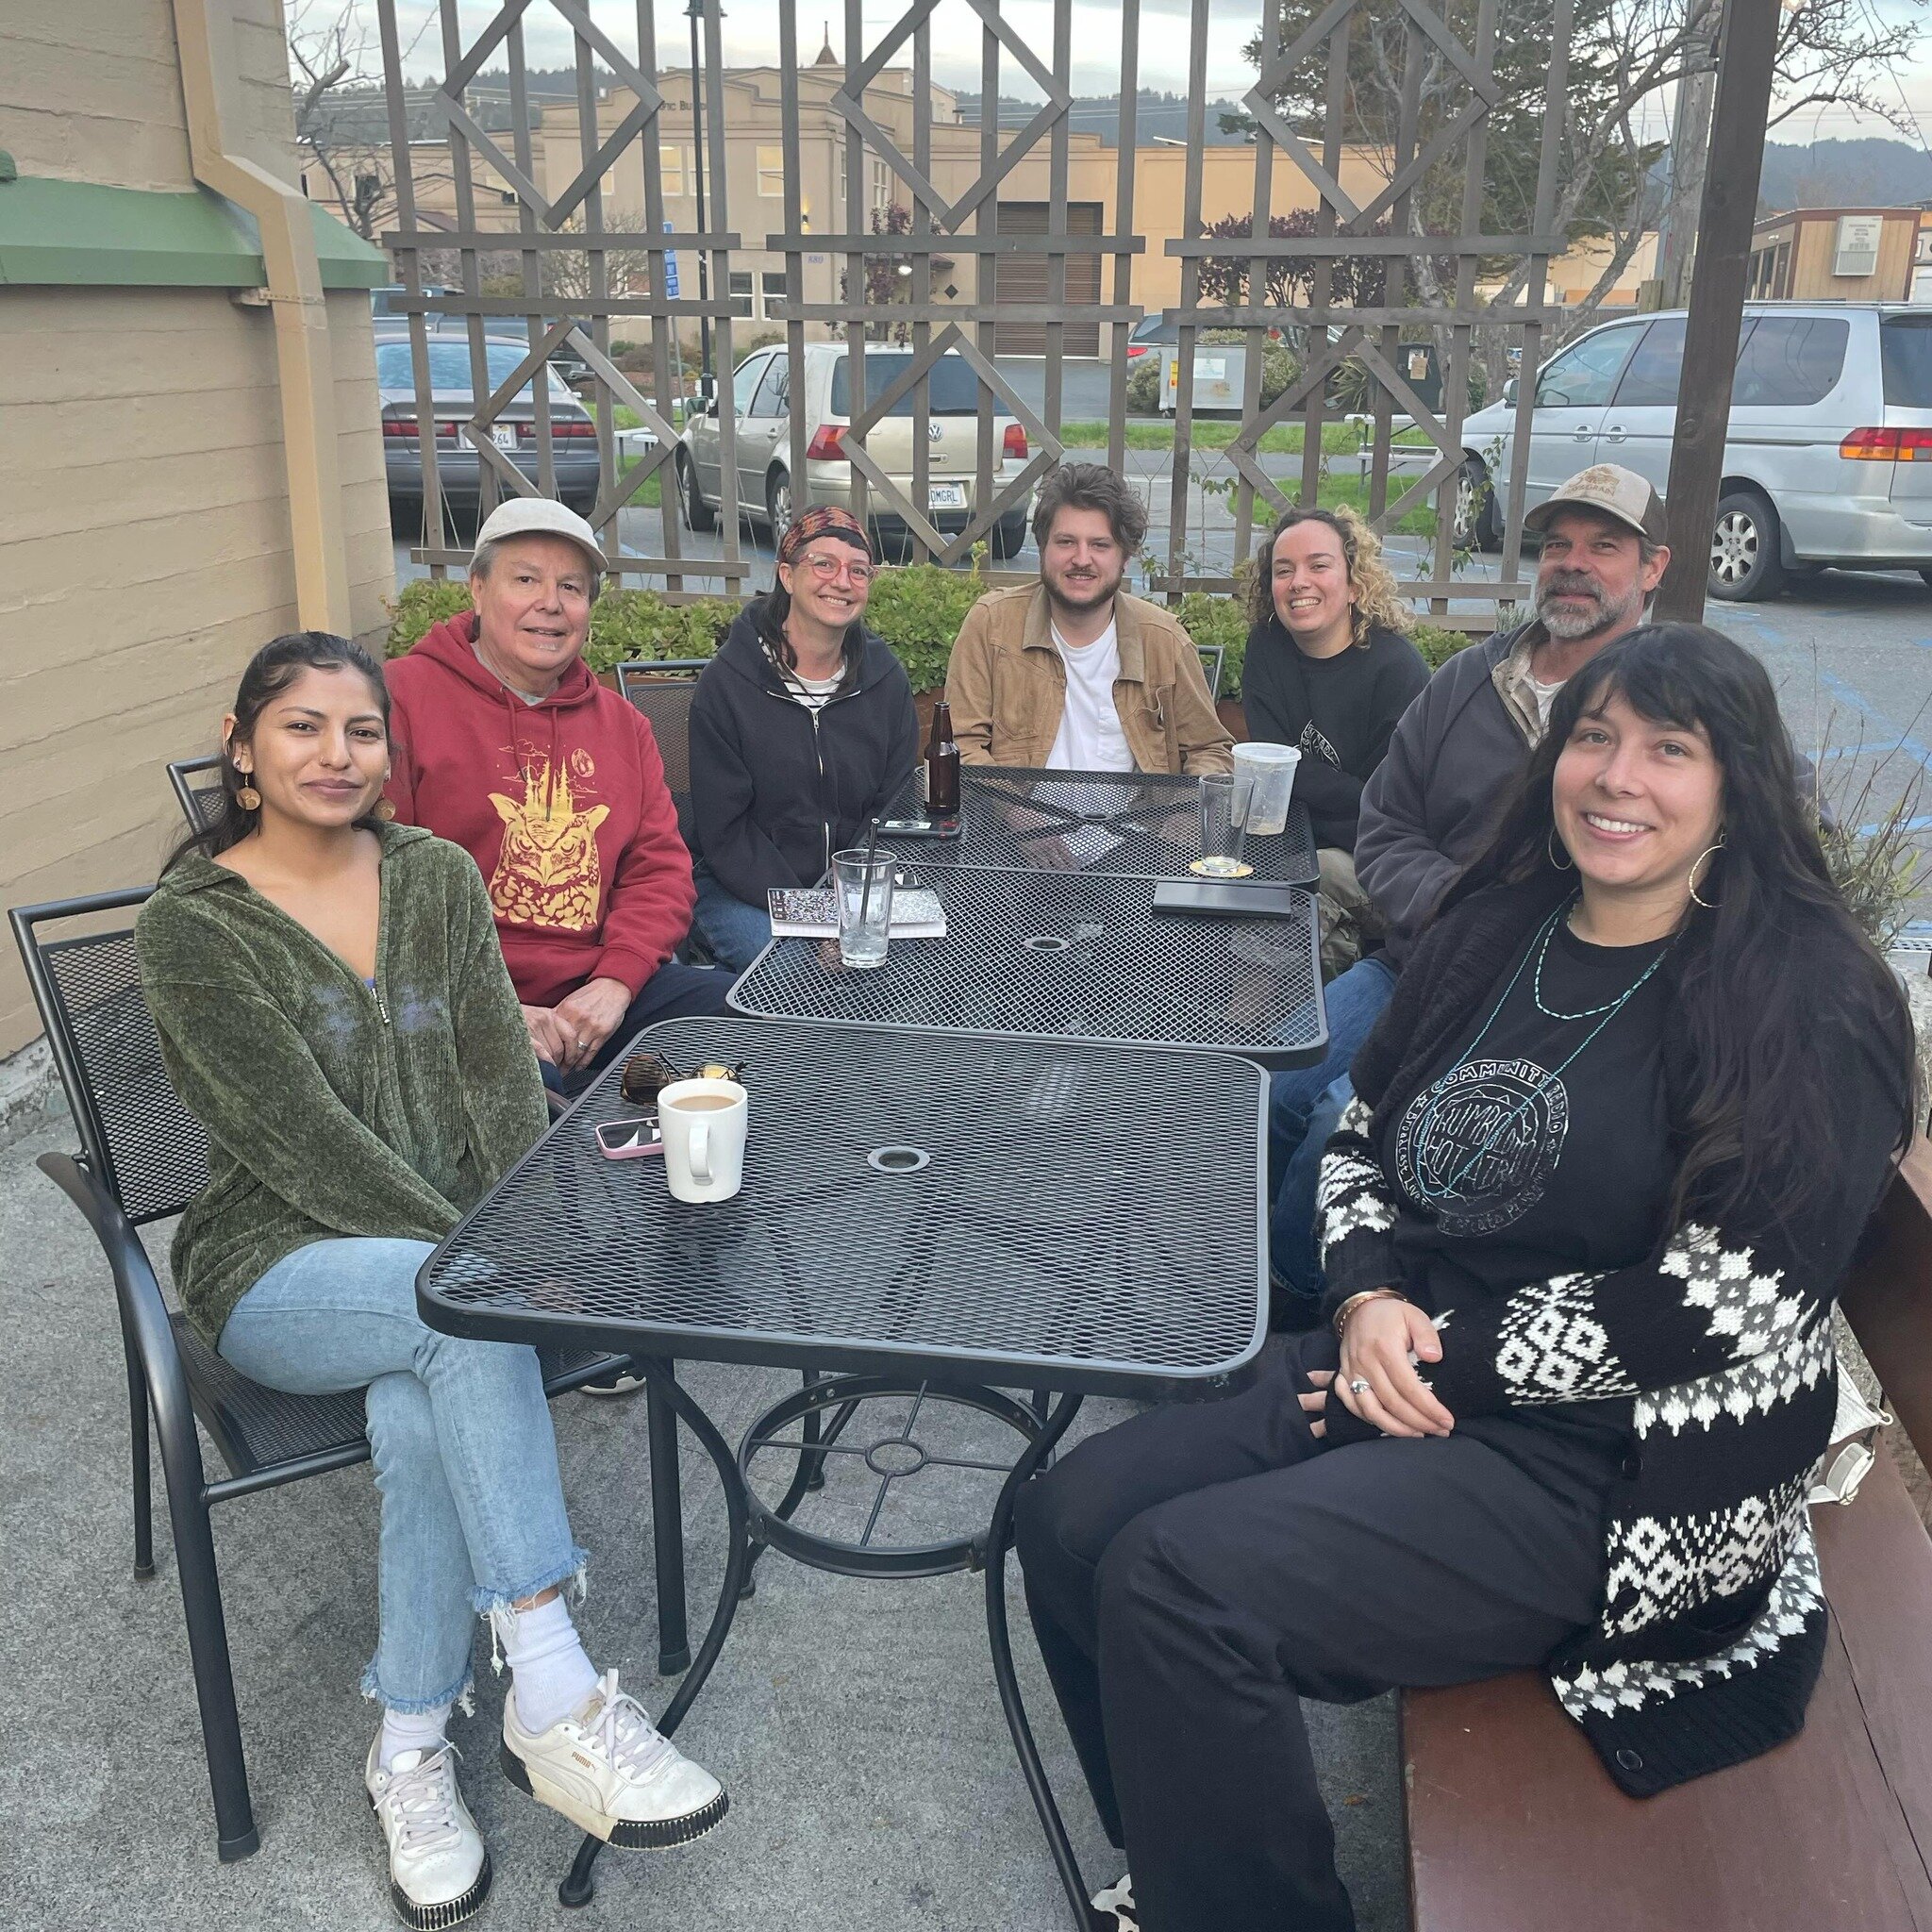 introducing &hellip; the official Humboldt Hot Air advisory committee !! 🌟 

from left to right we have DJ Rhi Marie, David Rhodes, Anya, DJ Jackalope, Neroli, Jay &amp; DJ Mary Jane 🌱✨ 

we met for the first time as a committee today and discussed